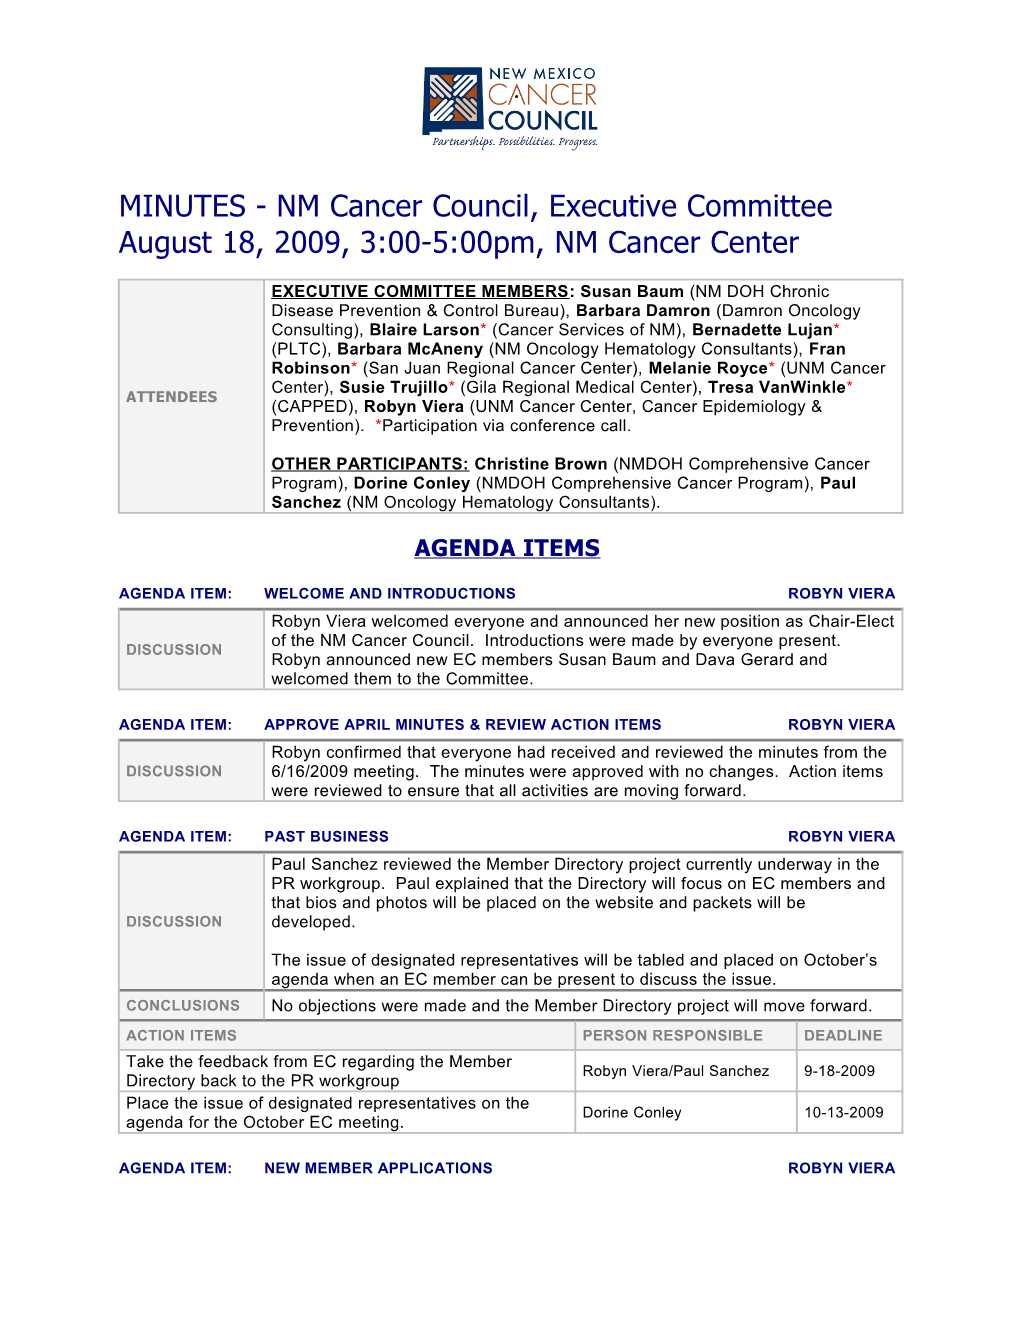 NM Cancer Council Executive Committee